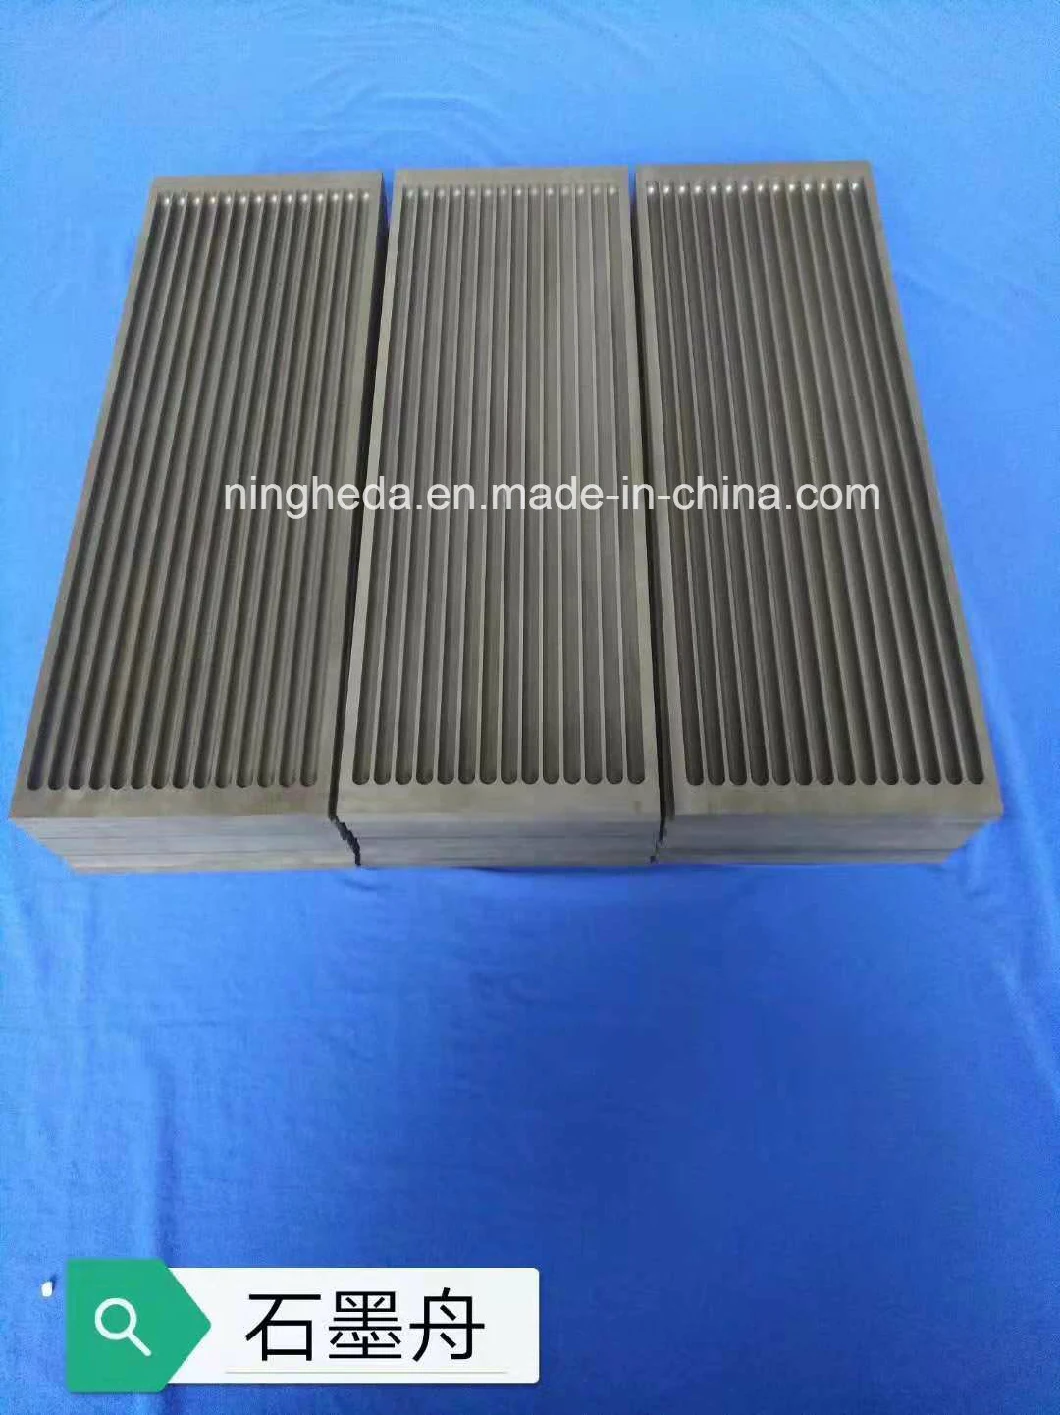 Graphite Sintering Plate for Powder Metallurgy and Hard Alloy